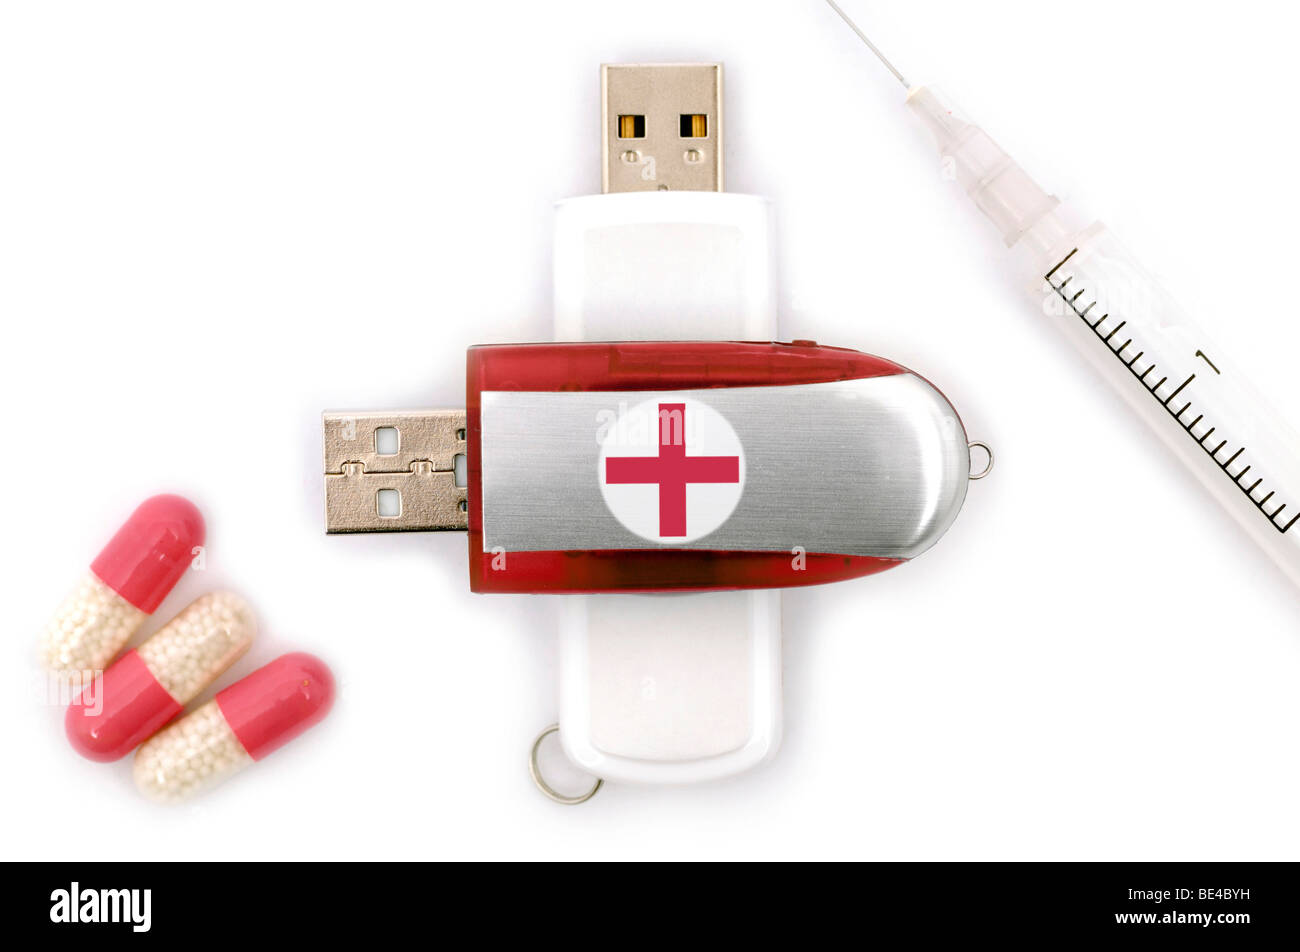 Pen drive with a red cross, injection needle and tablets, symbolic picture for digitalized medical patient data Stock Photo